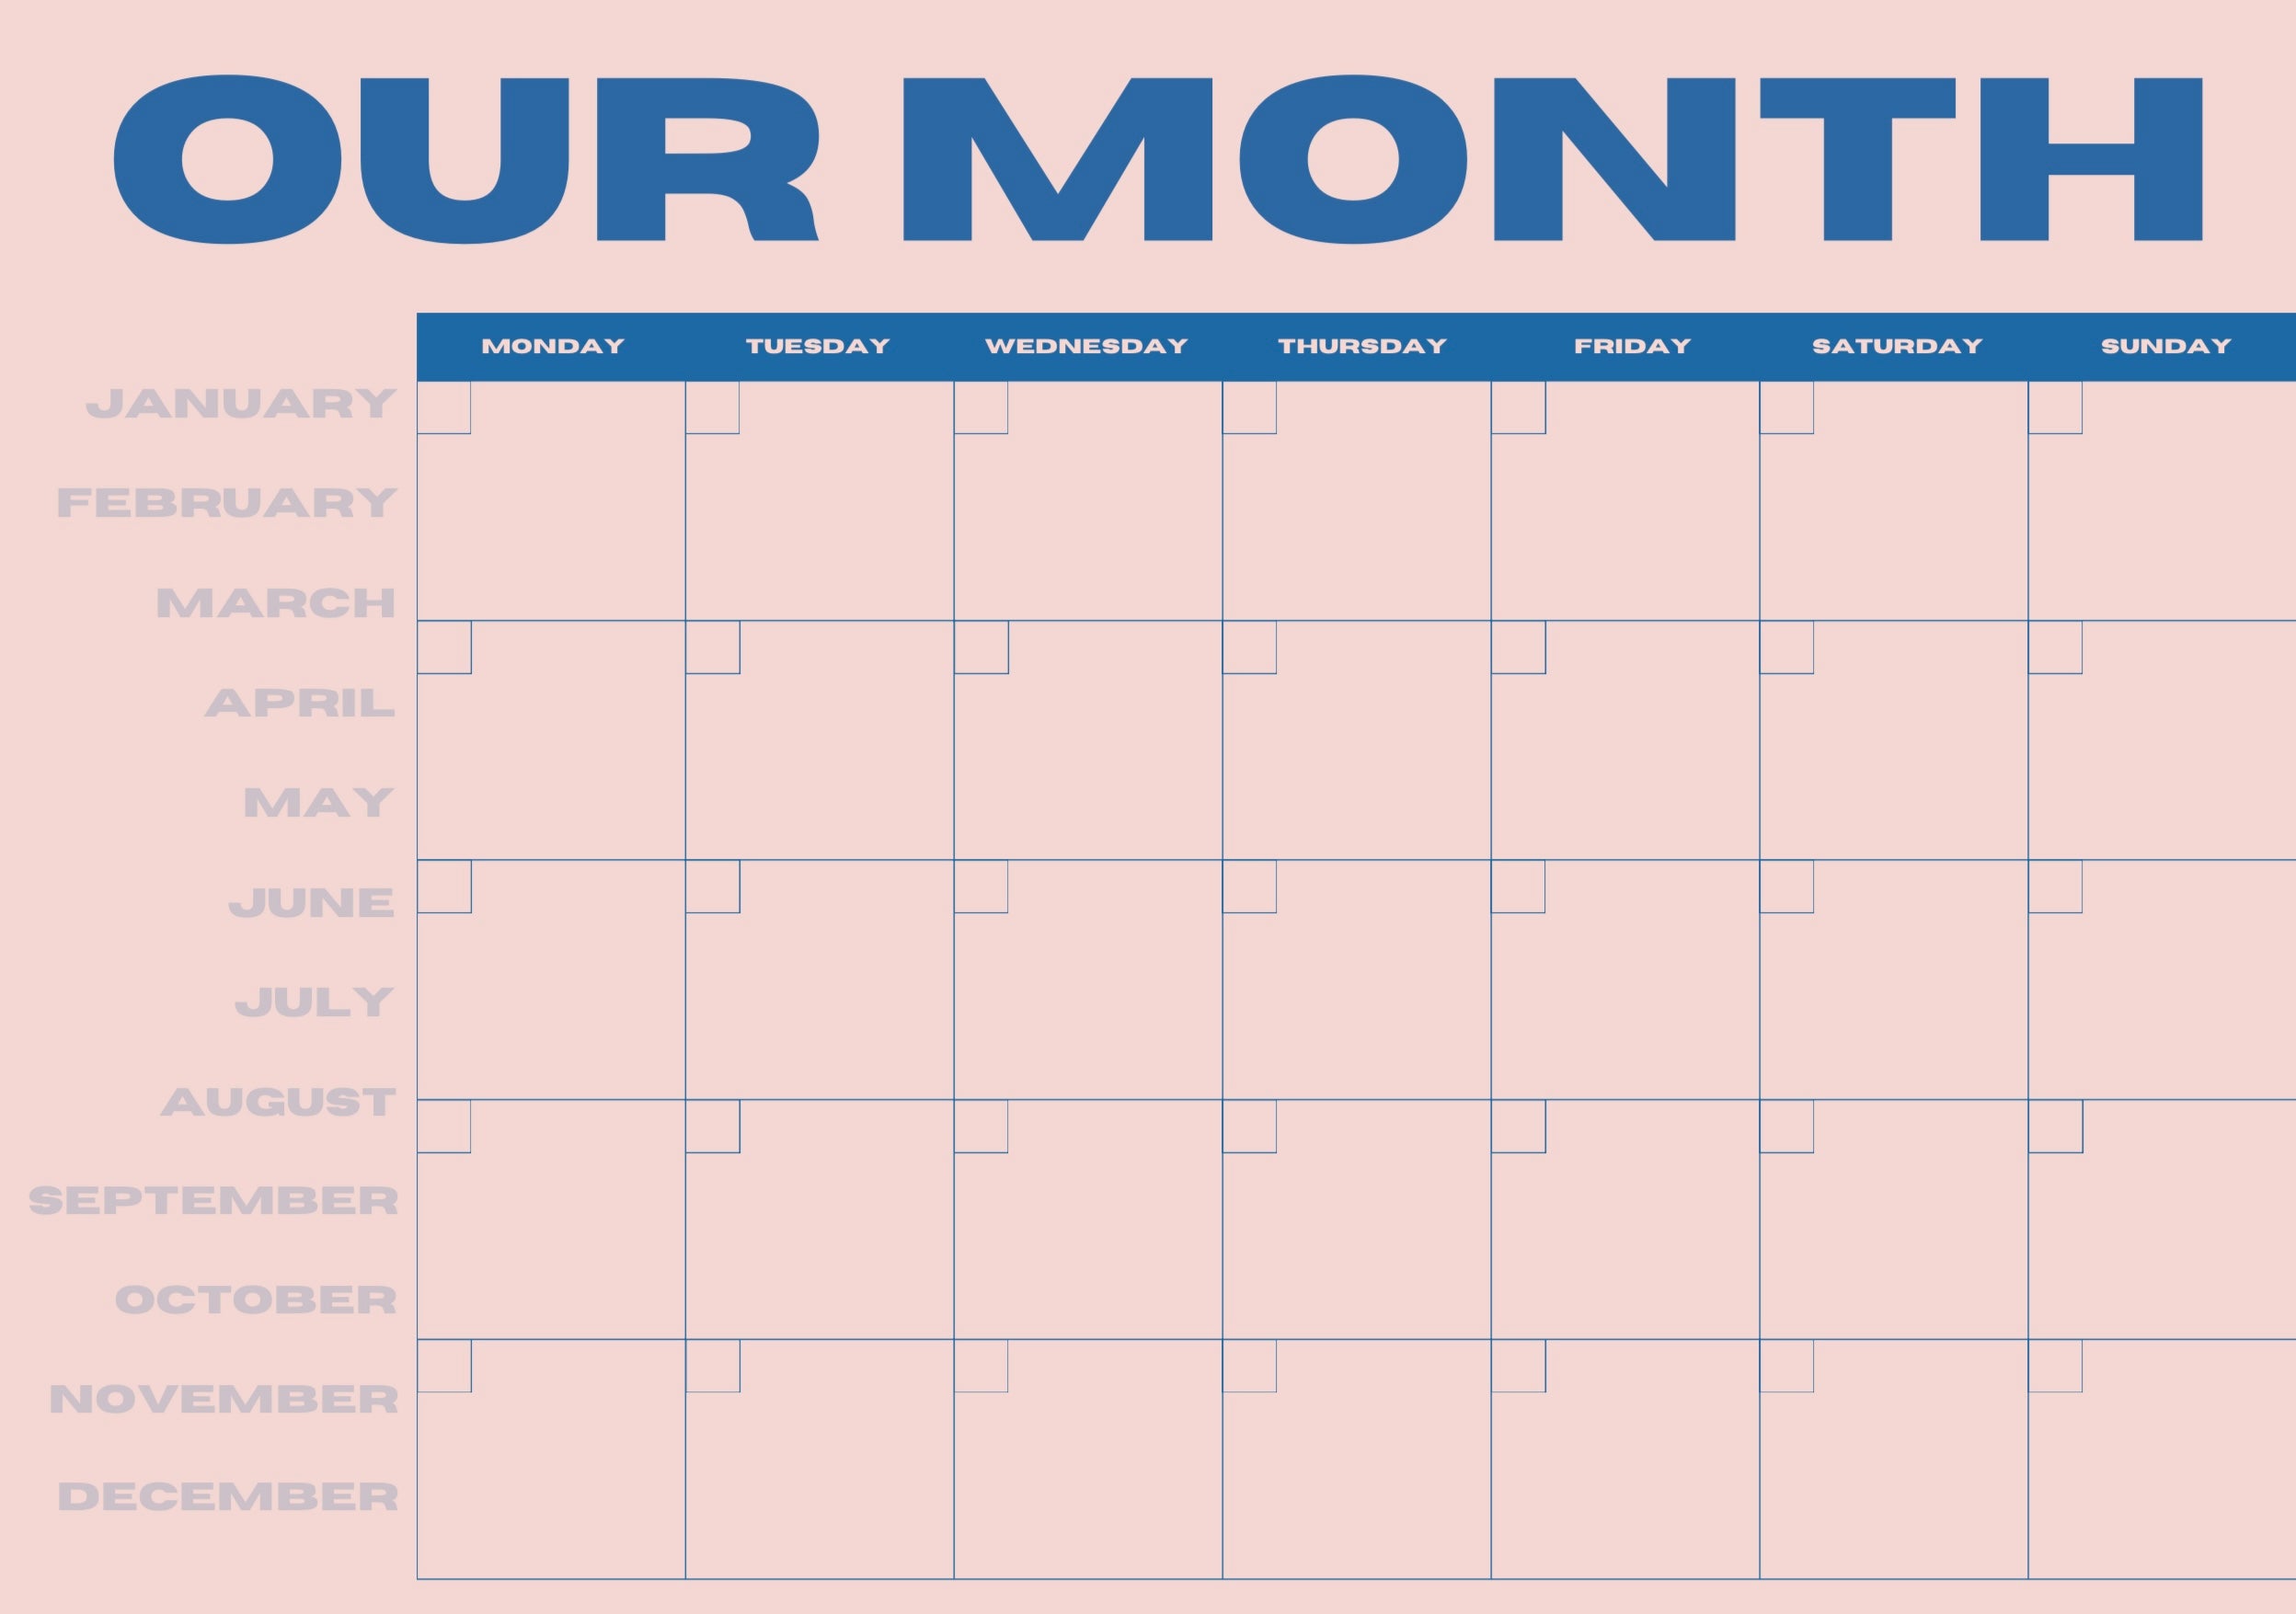 Our Month Planner - Pink and Blue